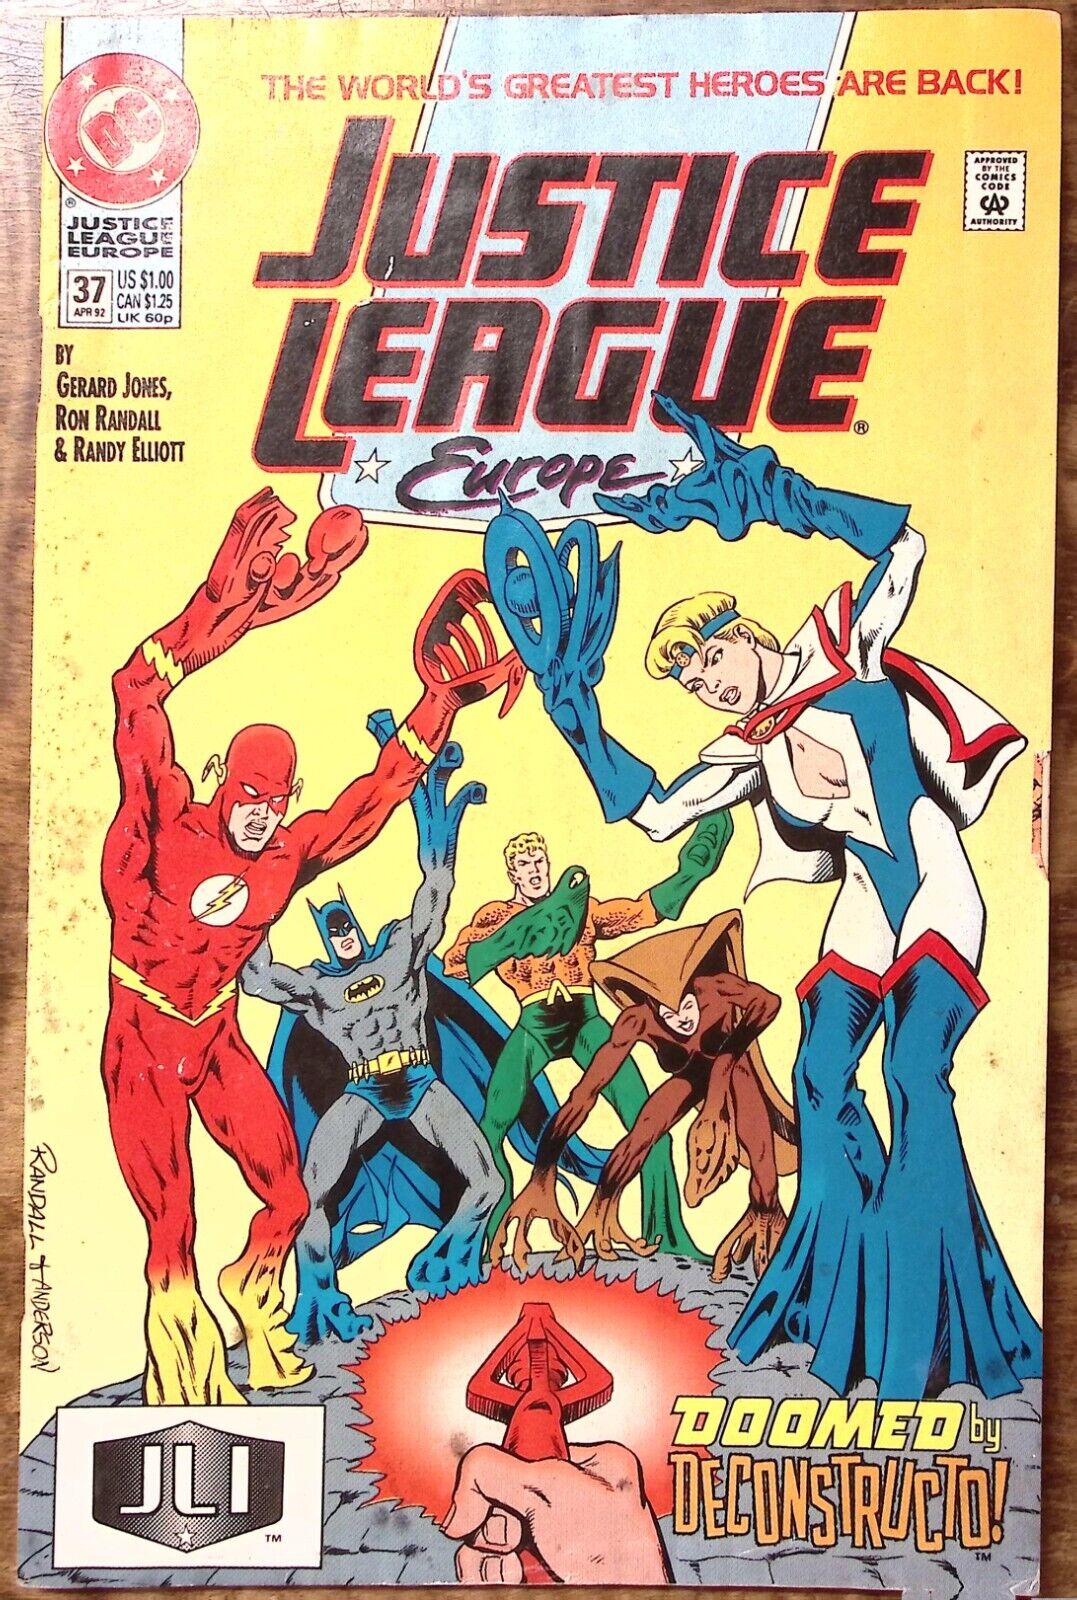 1992 JUSTICE LEAGUE EUROPE  APR #37  DOOMED BY DECONSTRUCTO  DC COMICS  Z3253